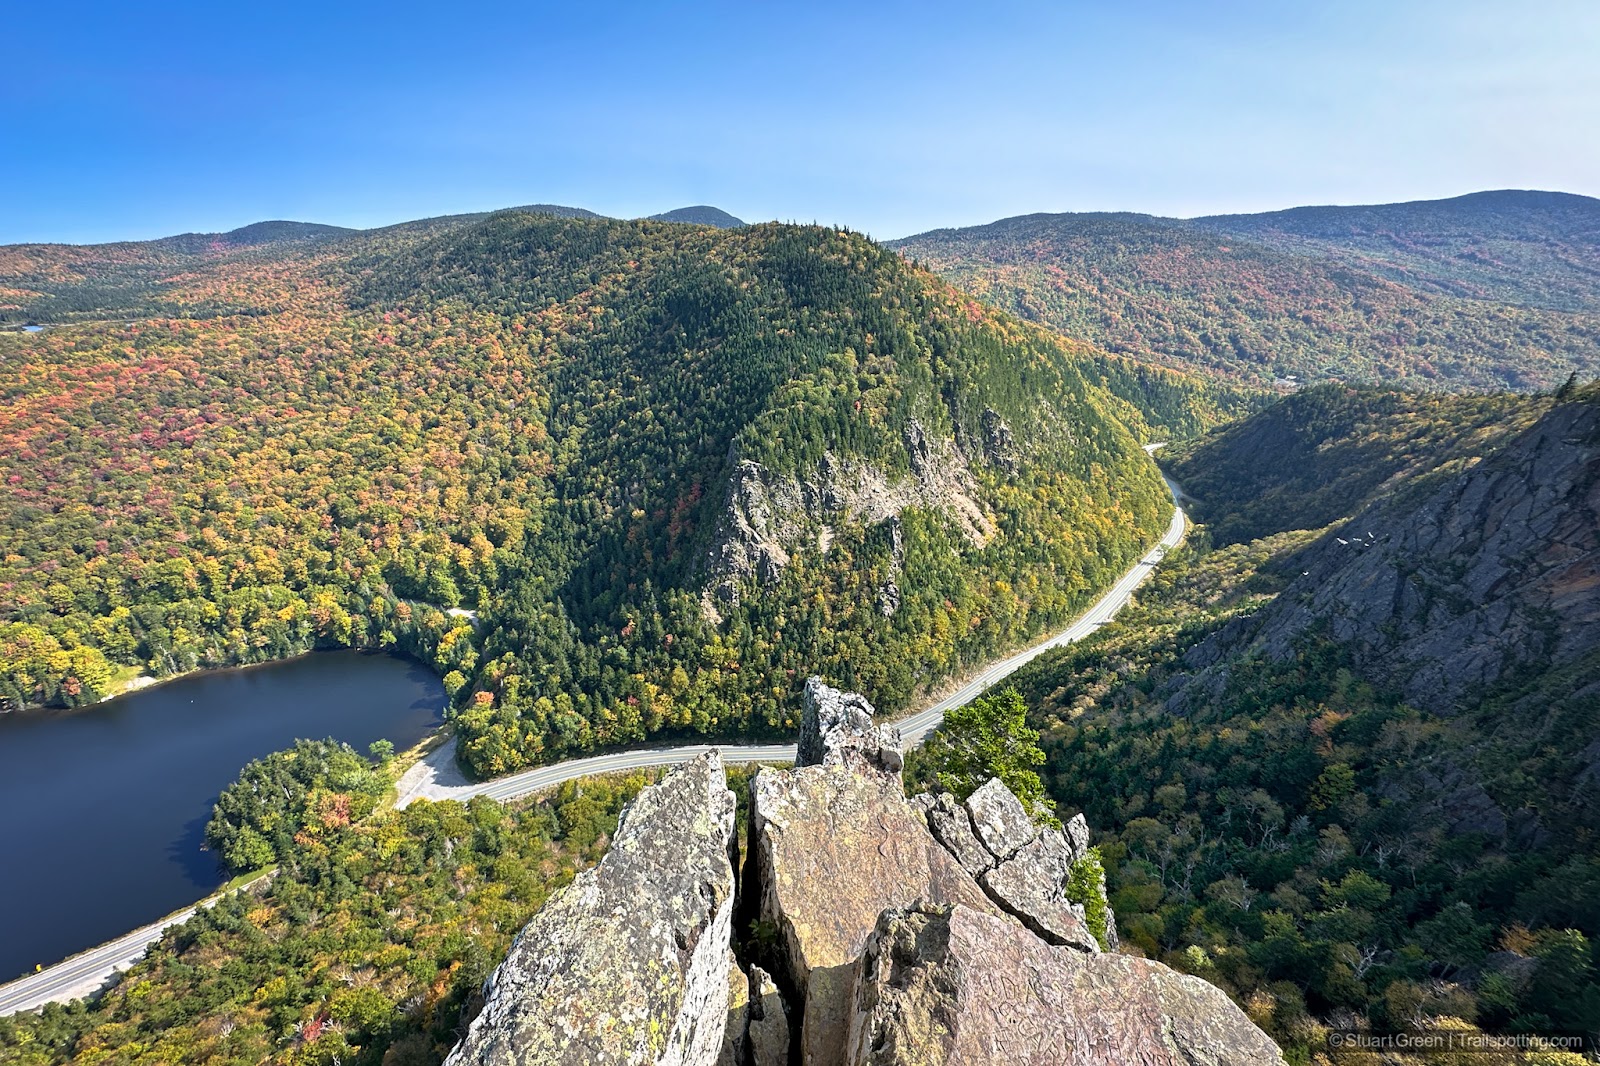 Looking over the end of table rock at Dixville Notch with a 700 foot drop to distant scenery.